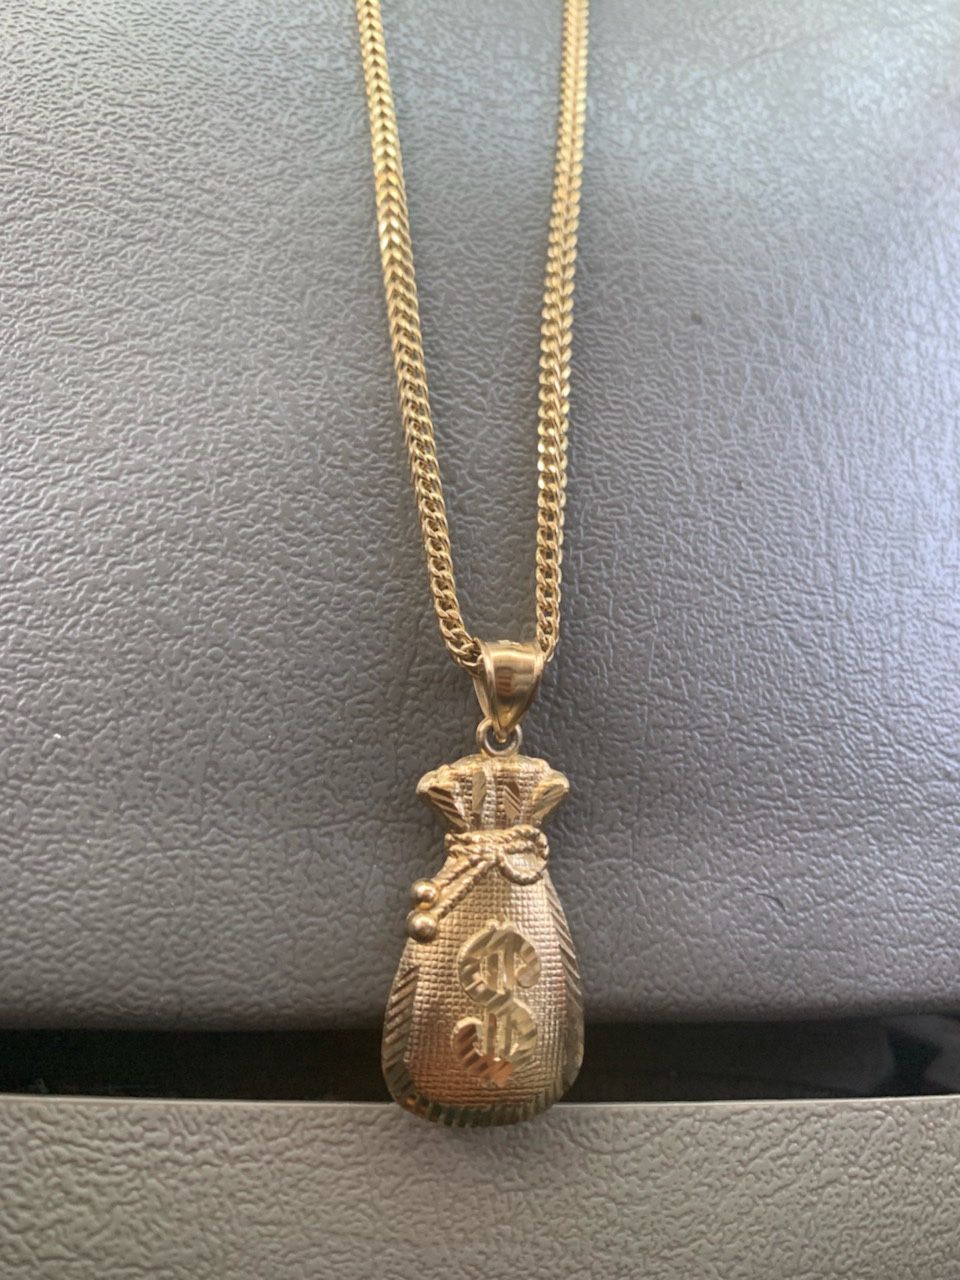 Real 10k gold Franco with real 10k gold money bag charm